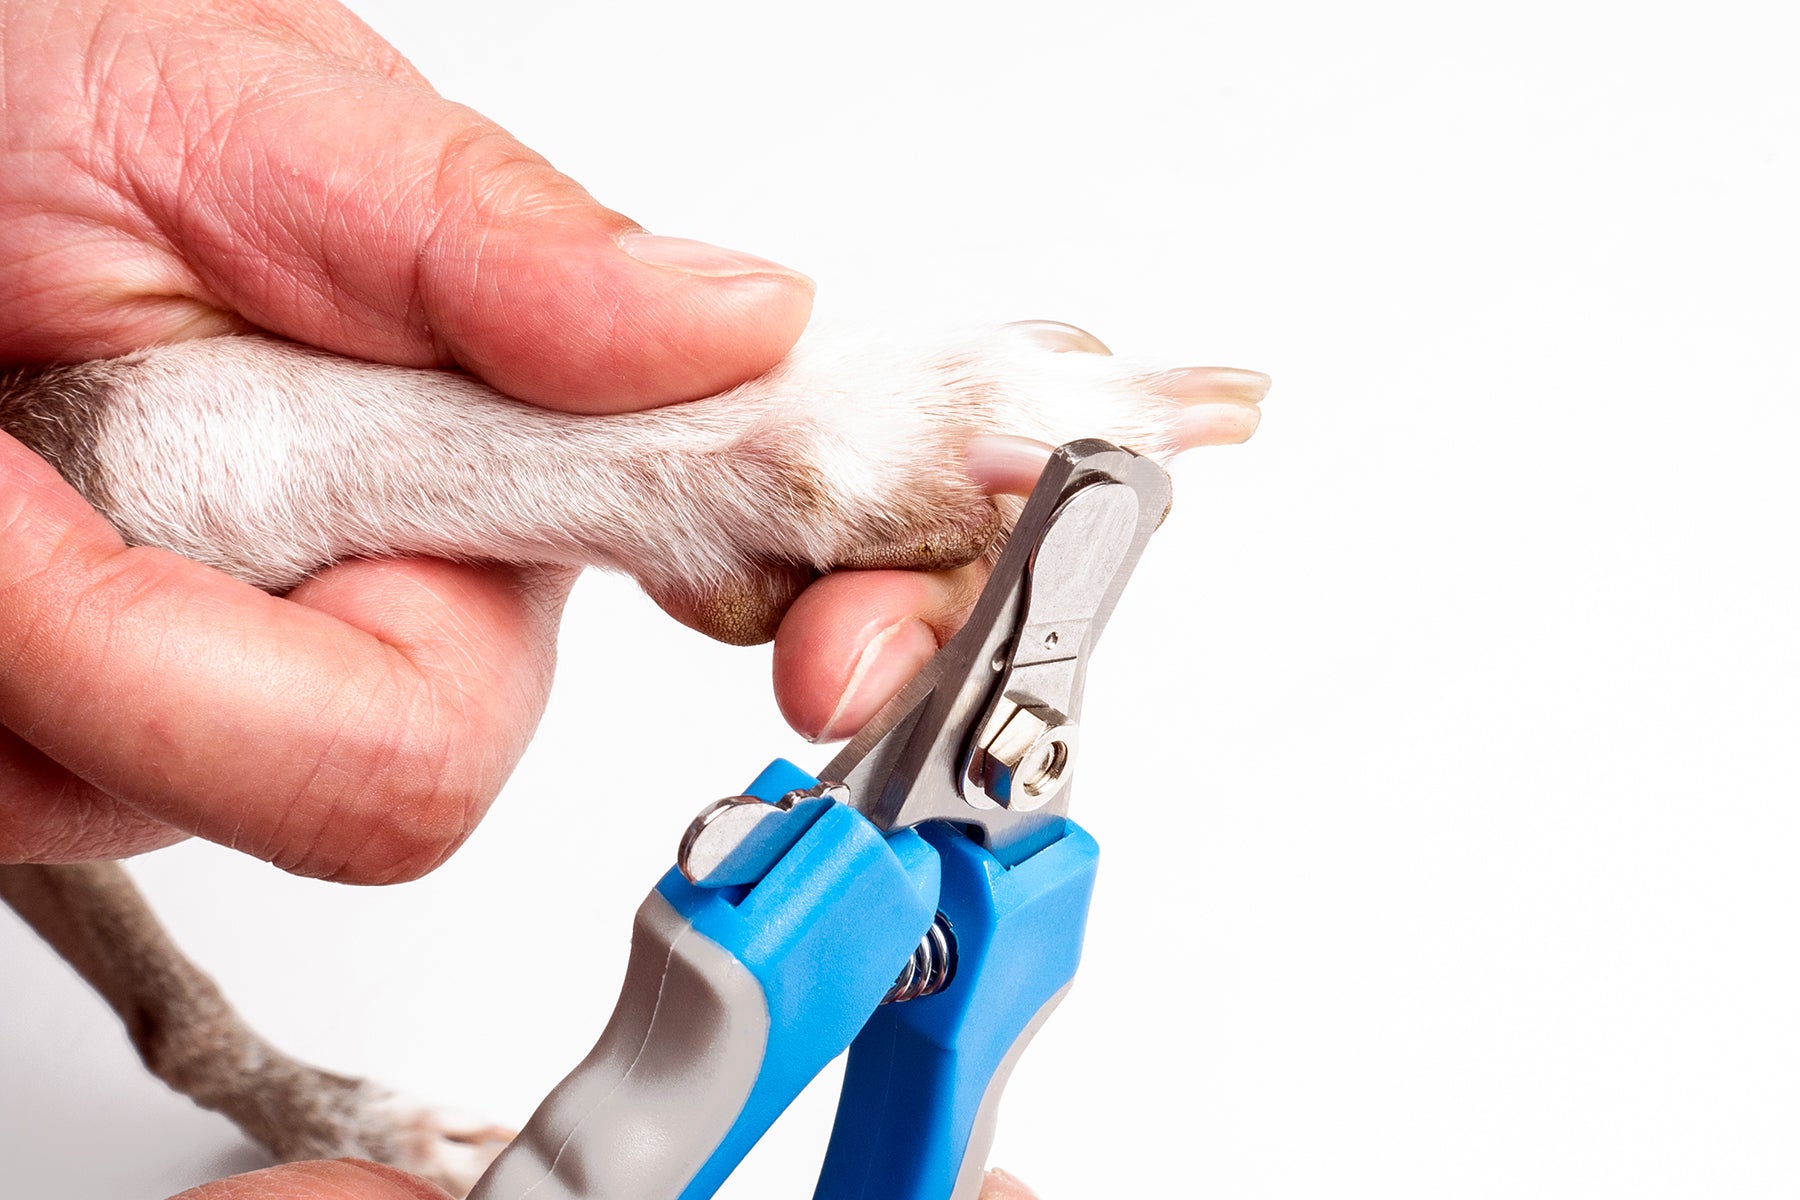 Tips for Home Grooming Your Dog